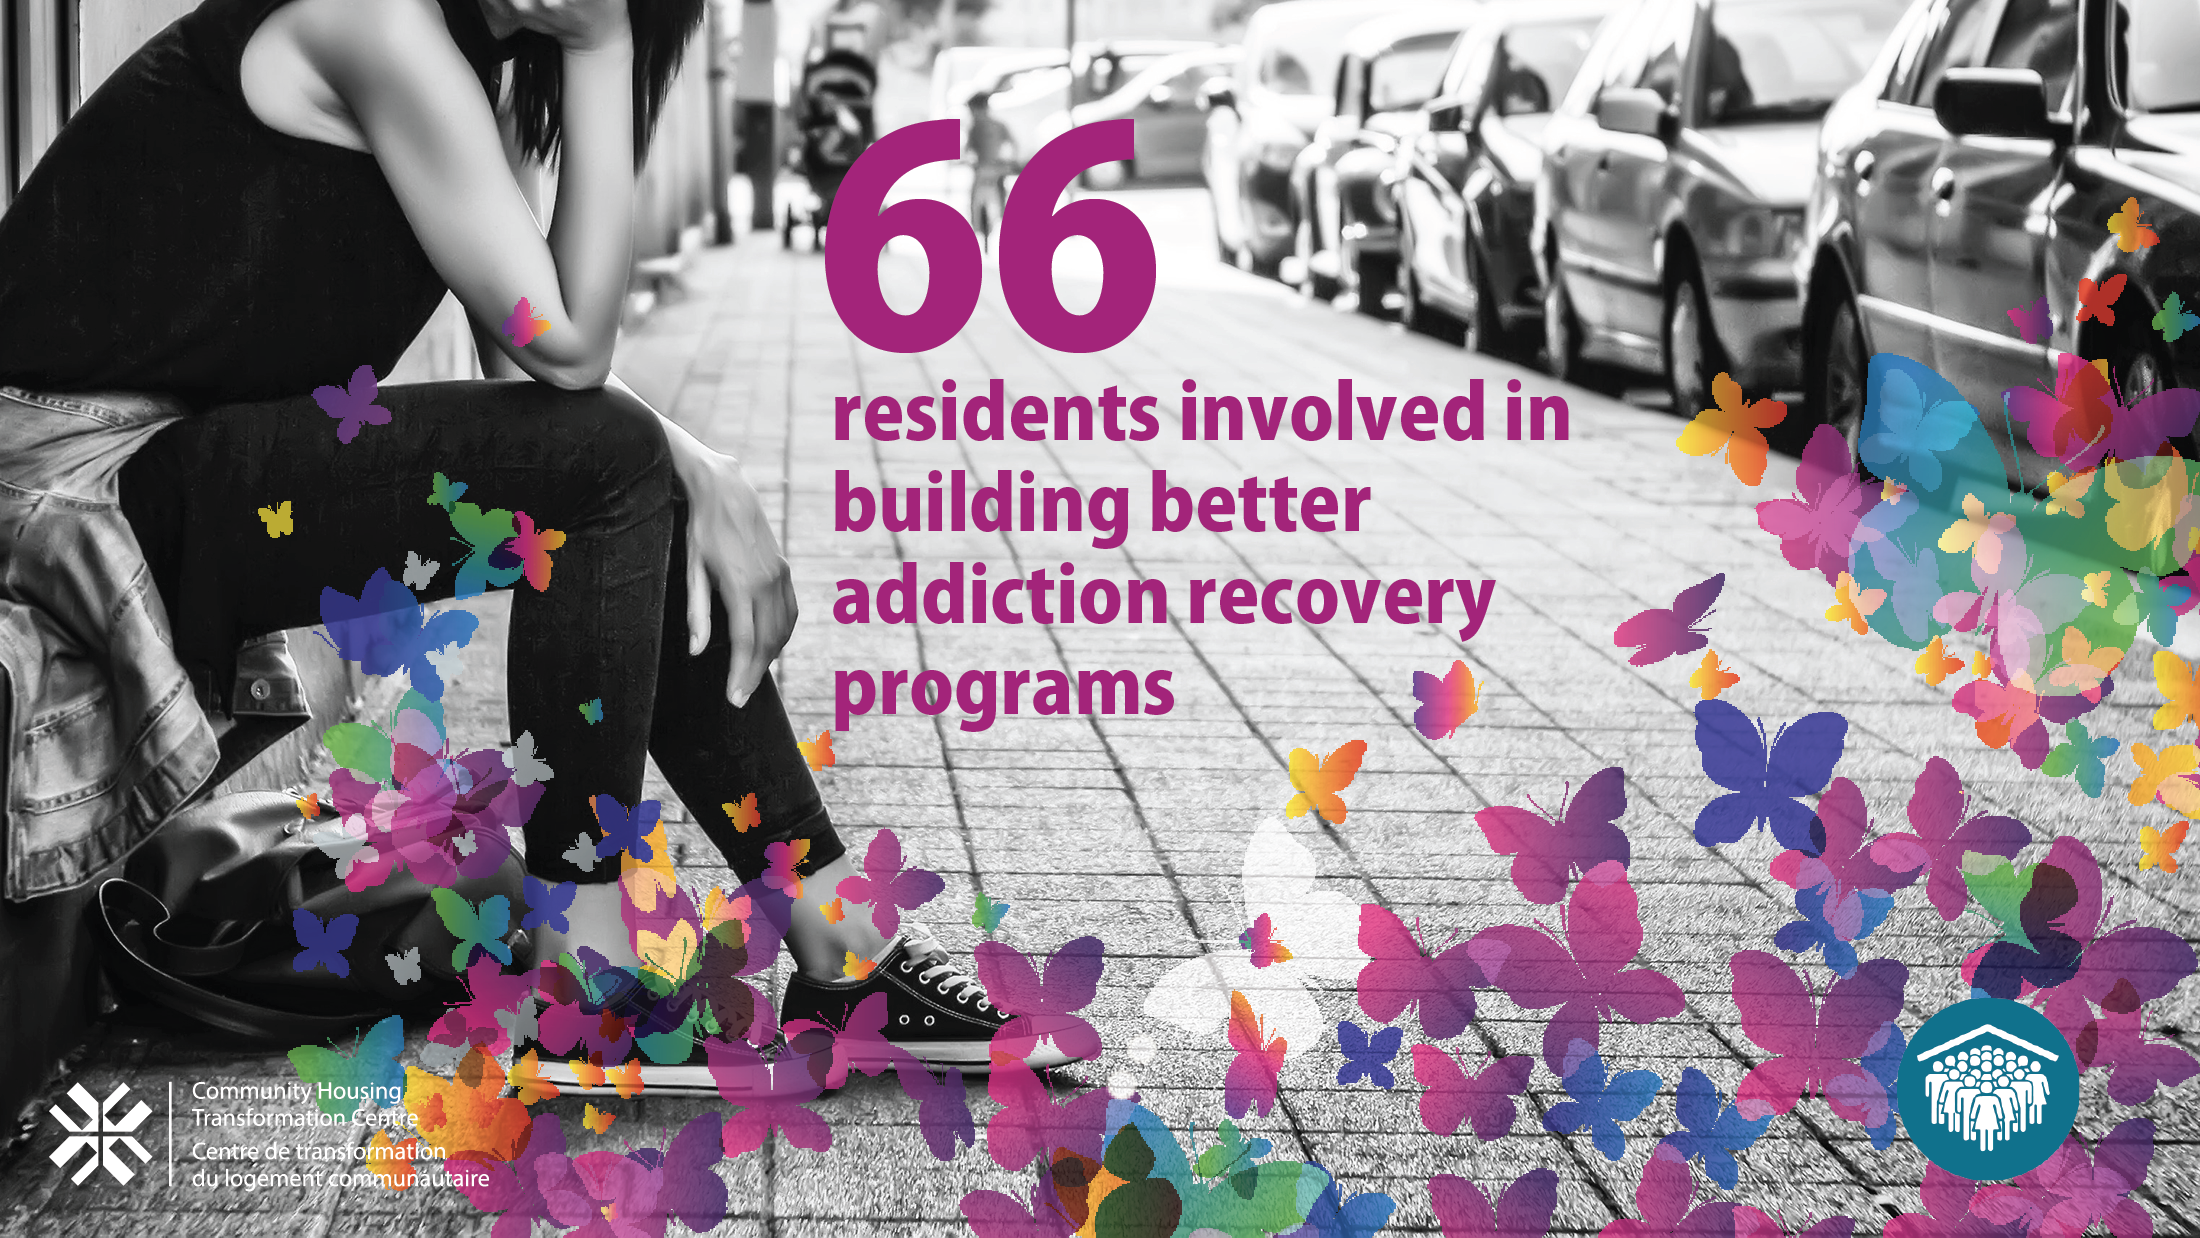 New models sought for treating, housing women with addiction issues